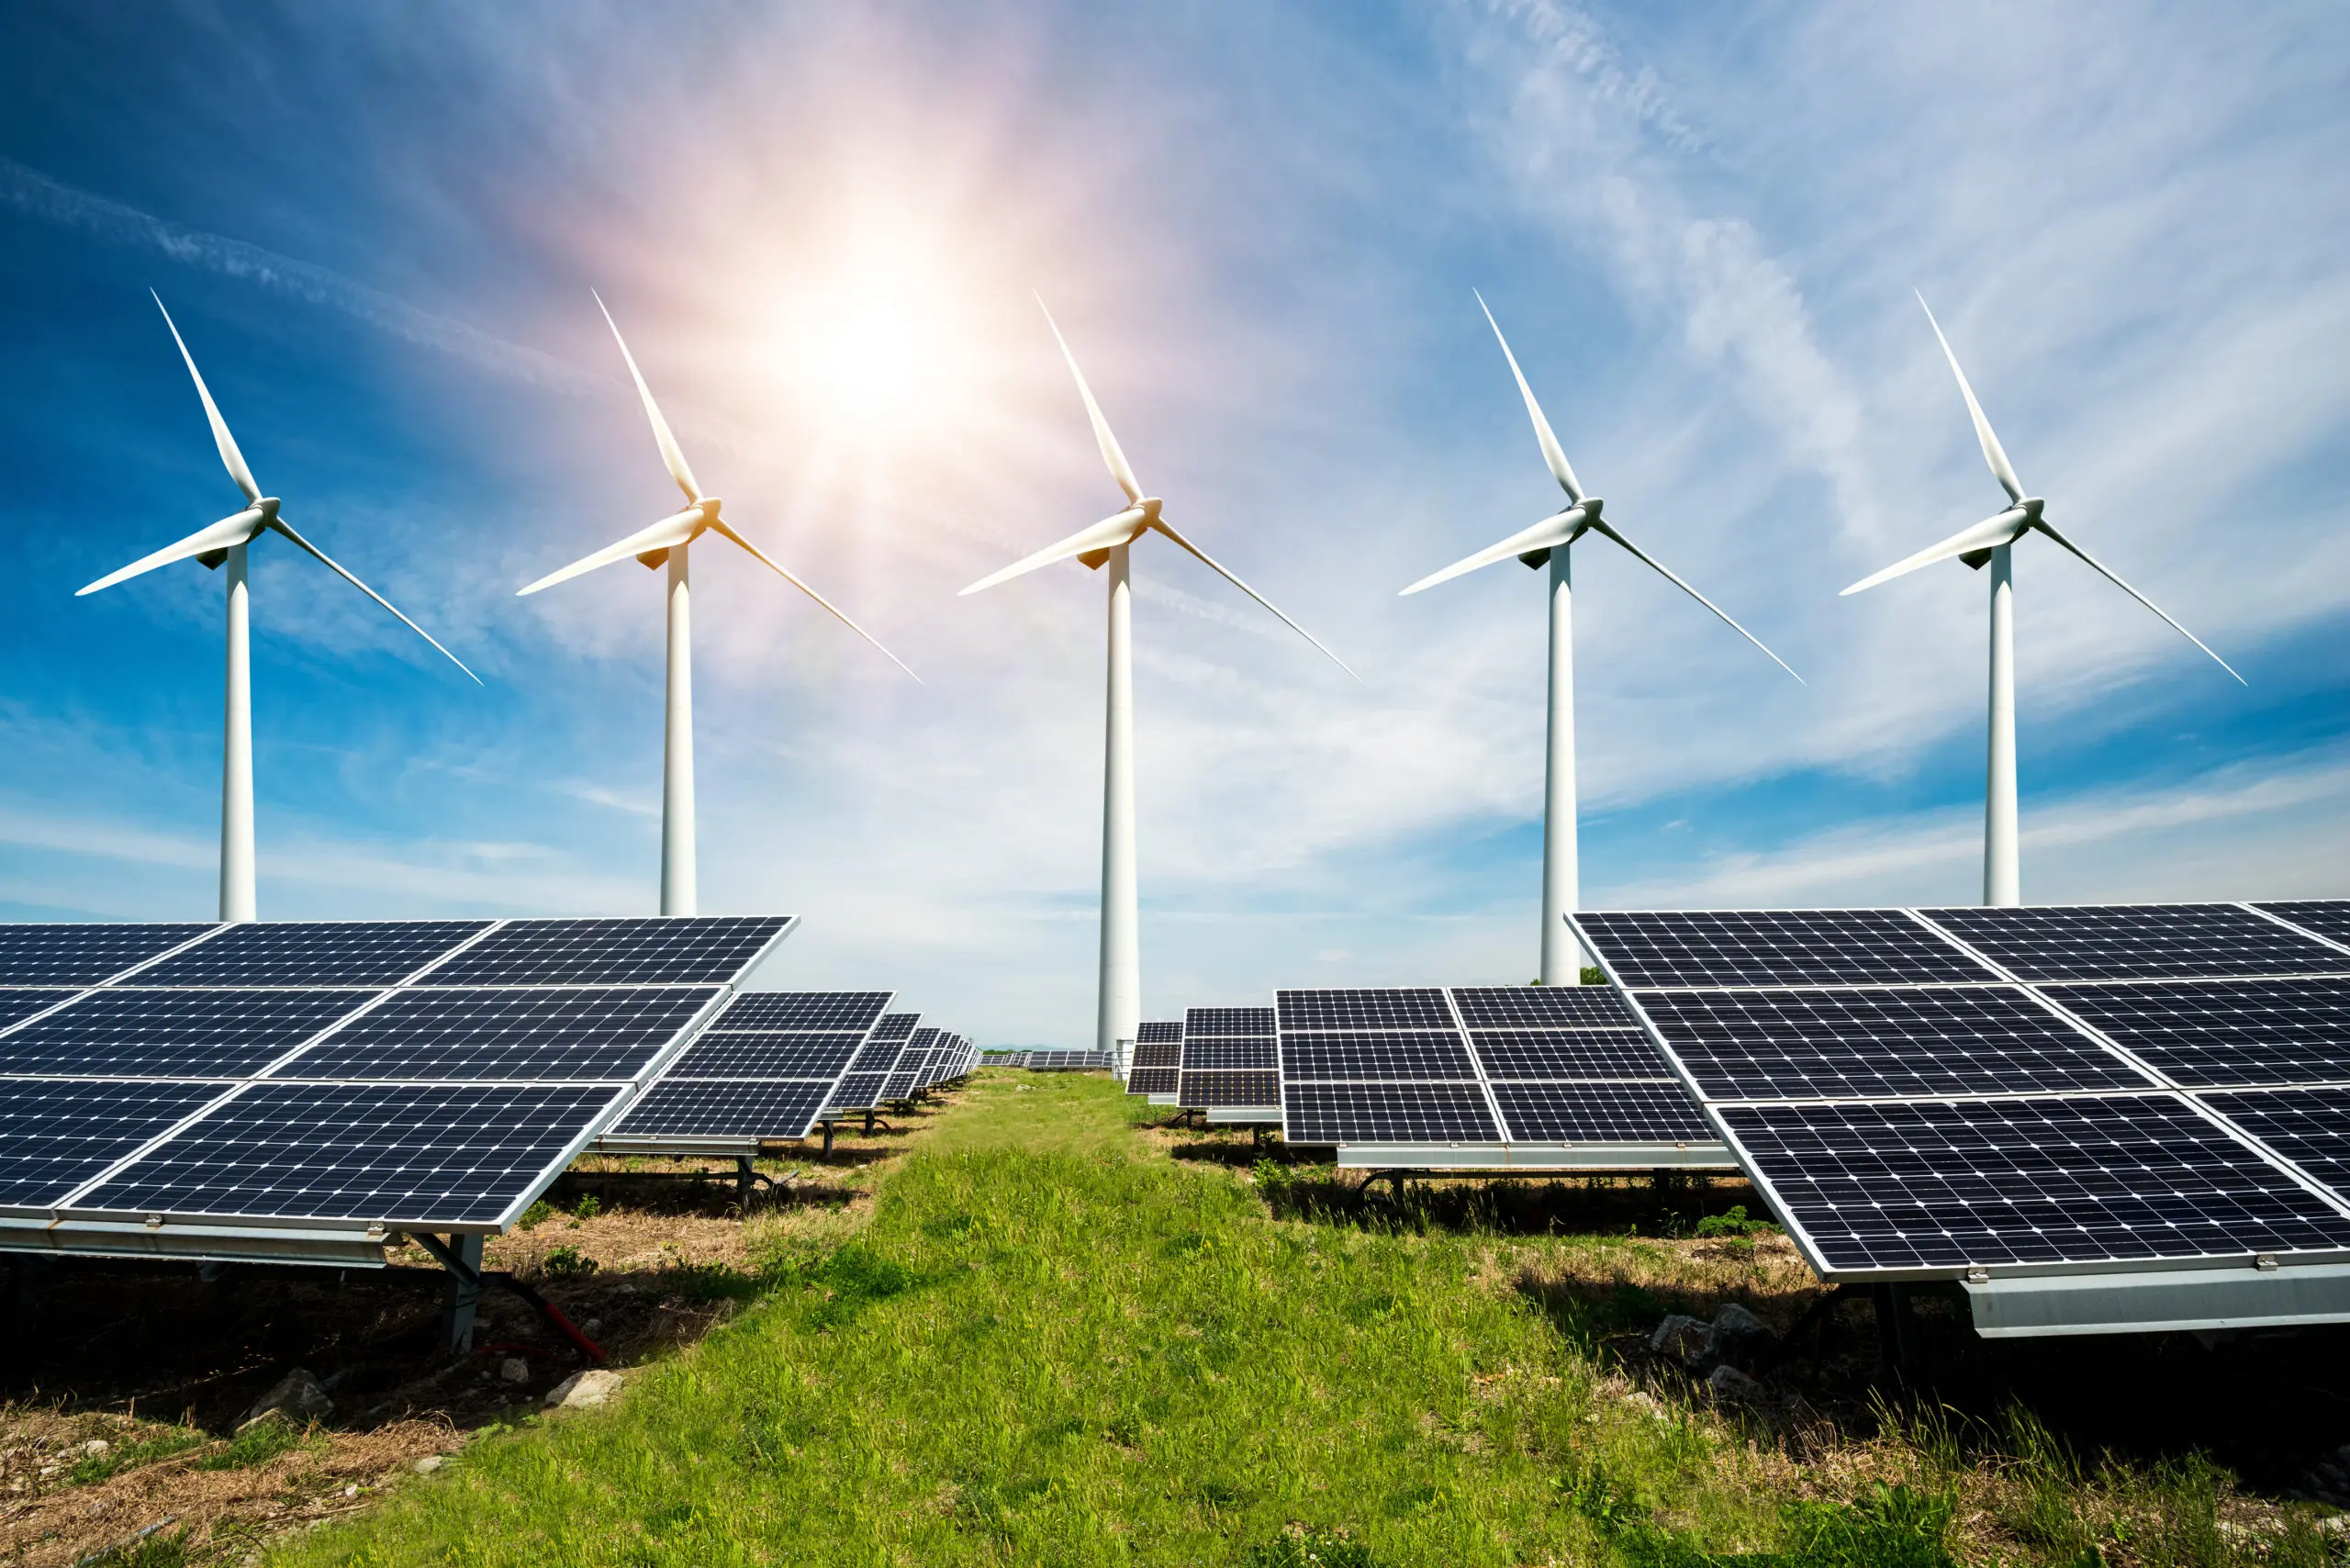 cost of solar and wind energy - How do you combine wind and solar energy